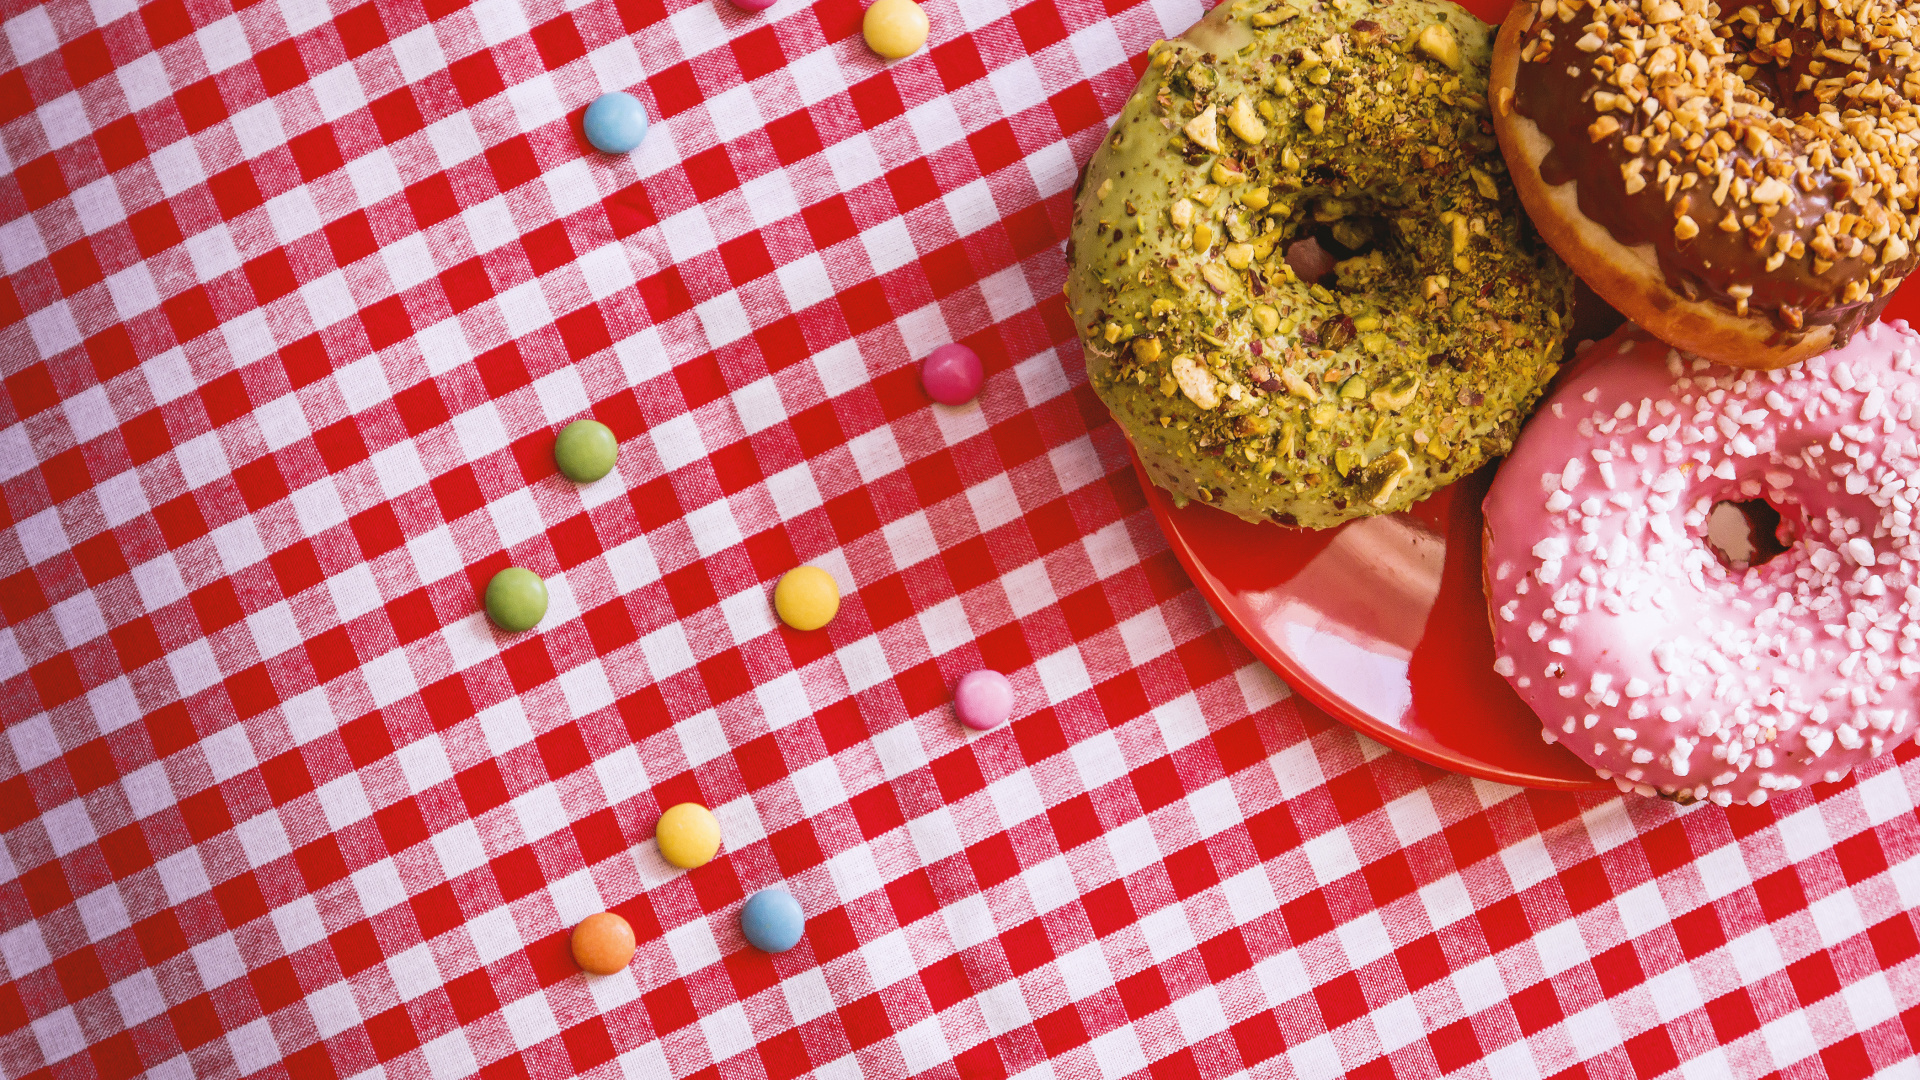 Brown Doughnut on Red and White Checkered Table Cloth. Wallpaper in 1920x1080 Resolution